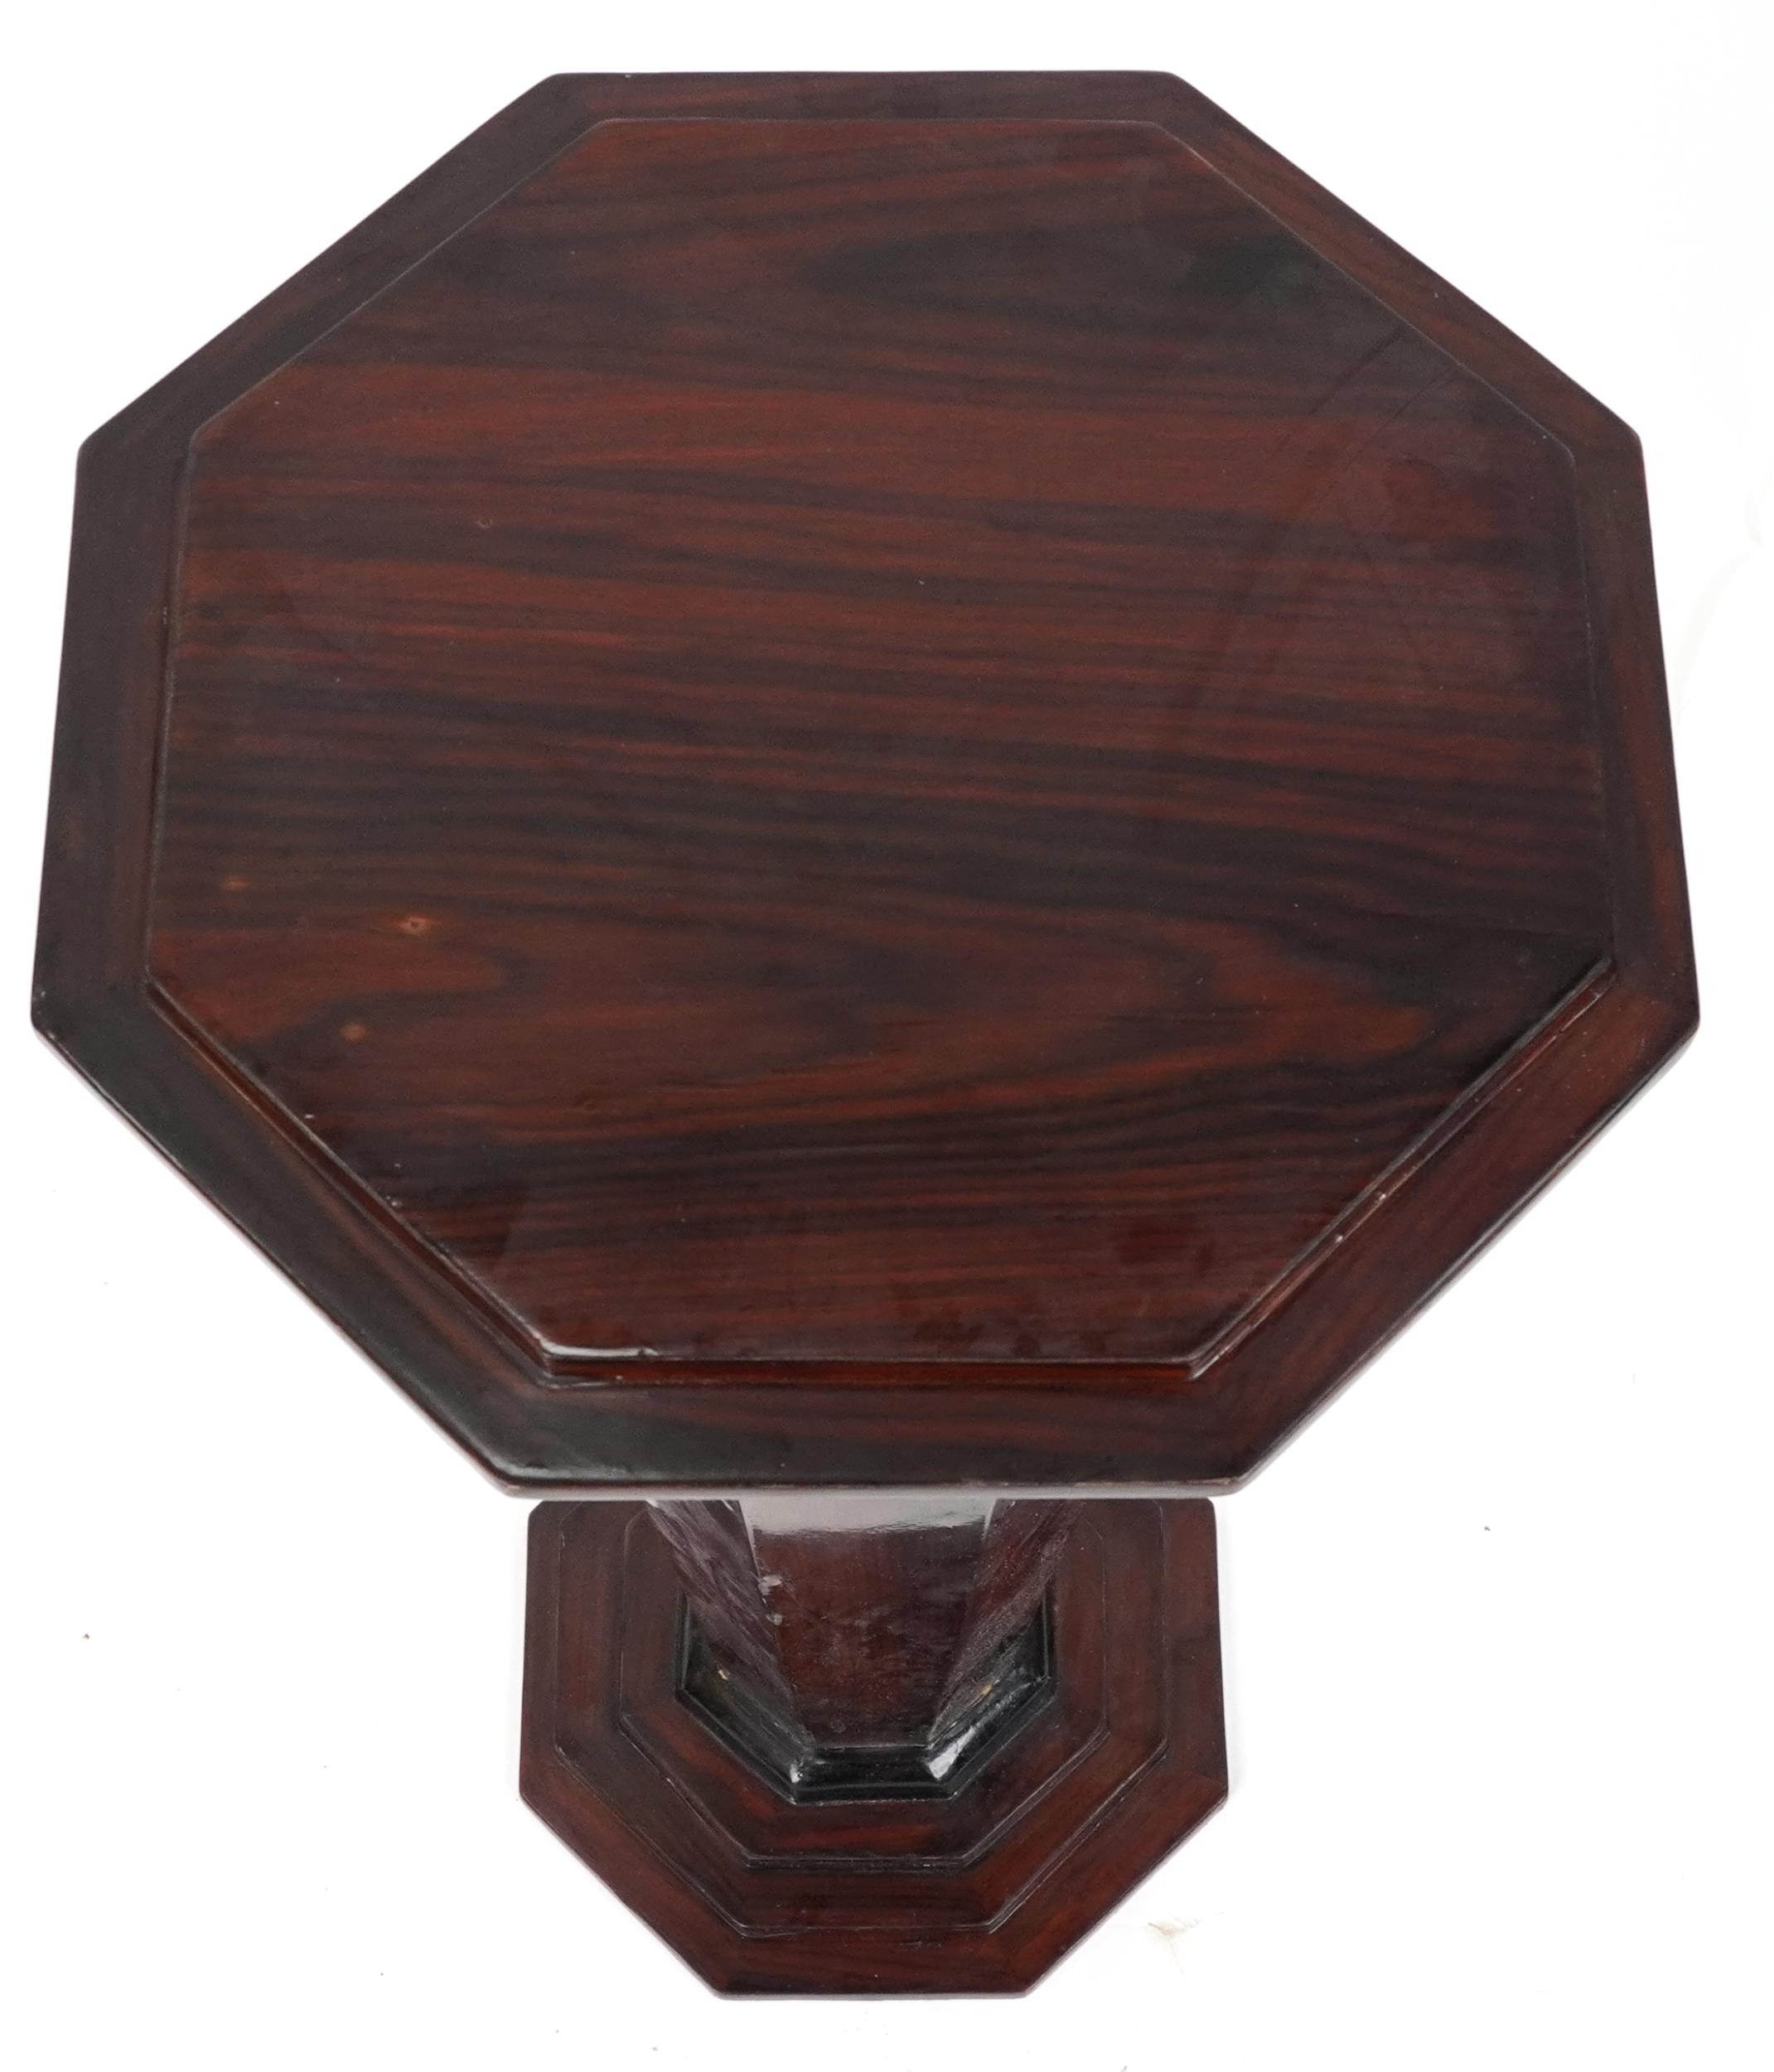 Art Deco style octagonal rosewood effect side pedestal with tapering column, 78.5cm high - Image 2 of 3